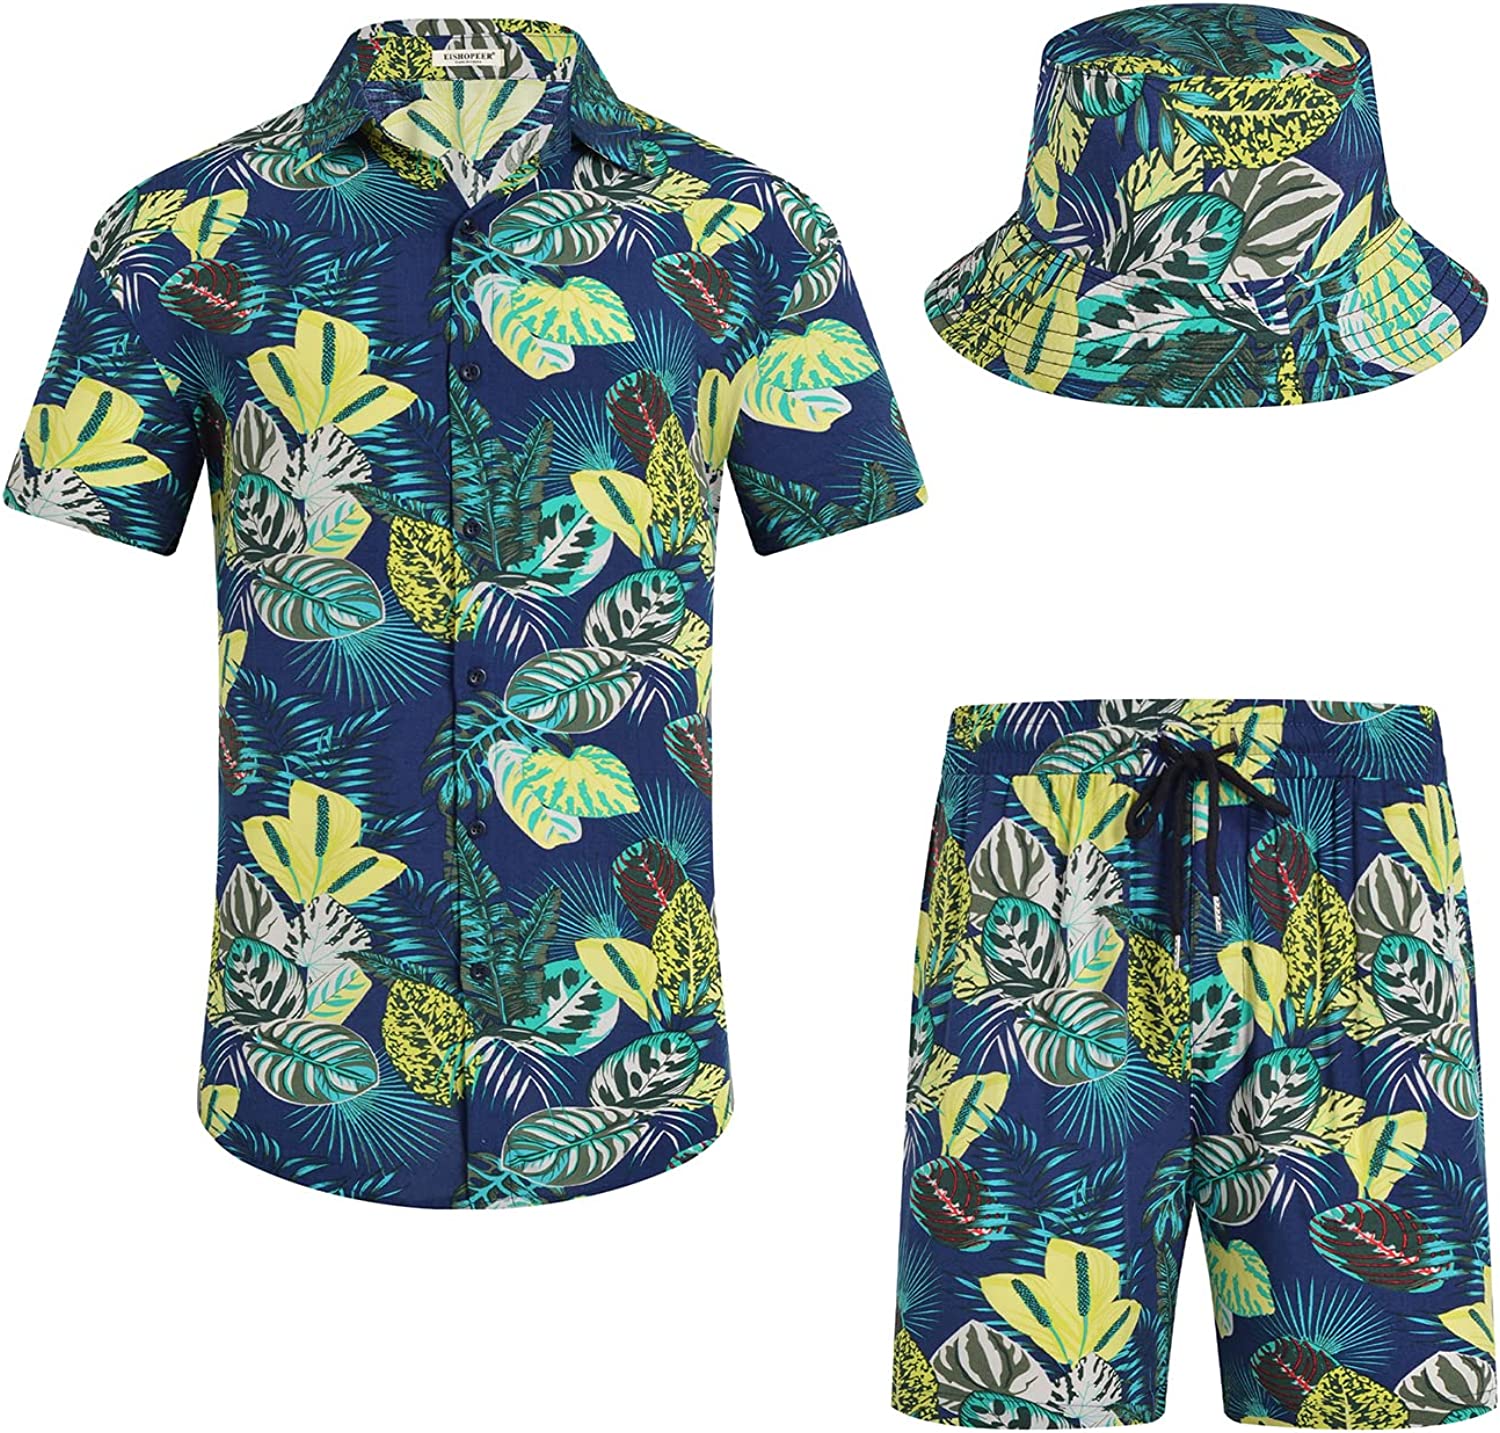 EISHOPEER Men's Flower Button Down Hawaiian Sets Casual Short Sleeve Shirt and Shorts Suits 